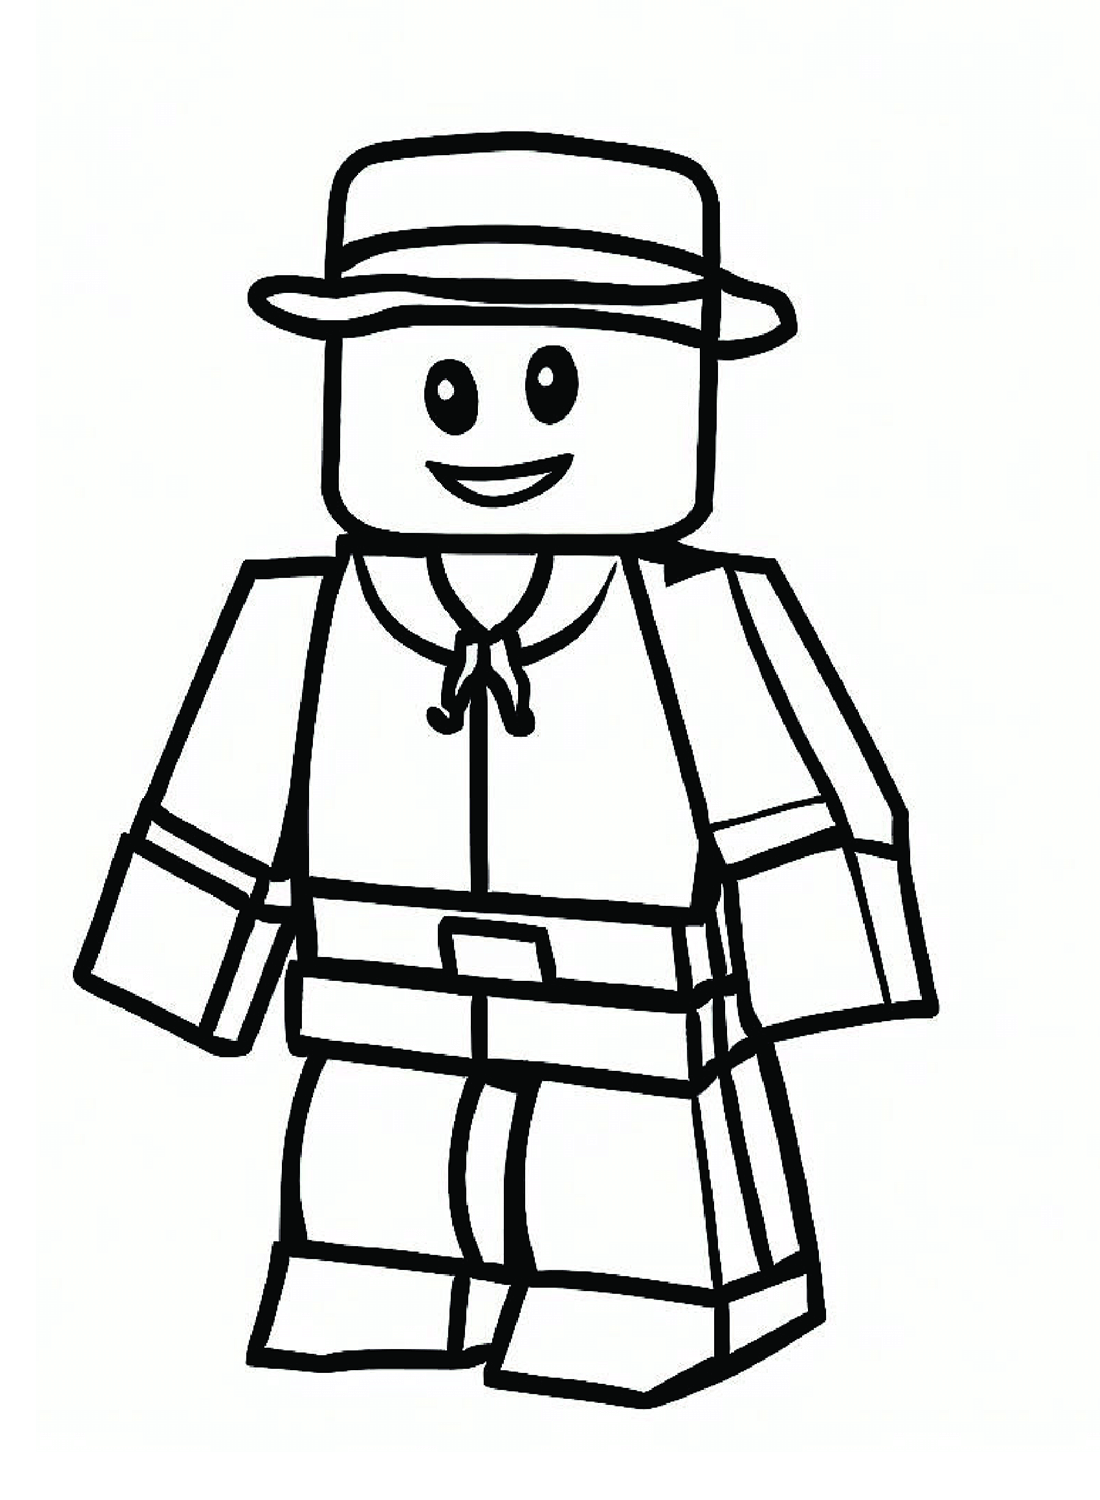 Roblox Coloring Pages Printable from Roblox